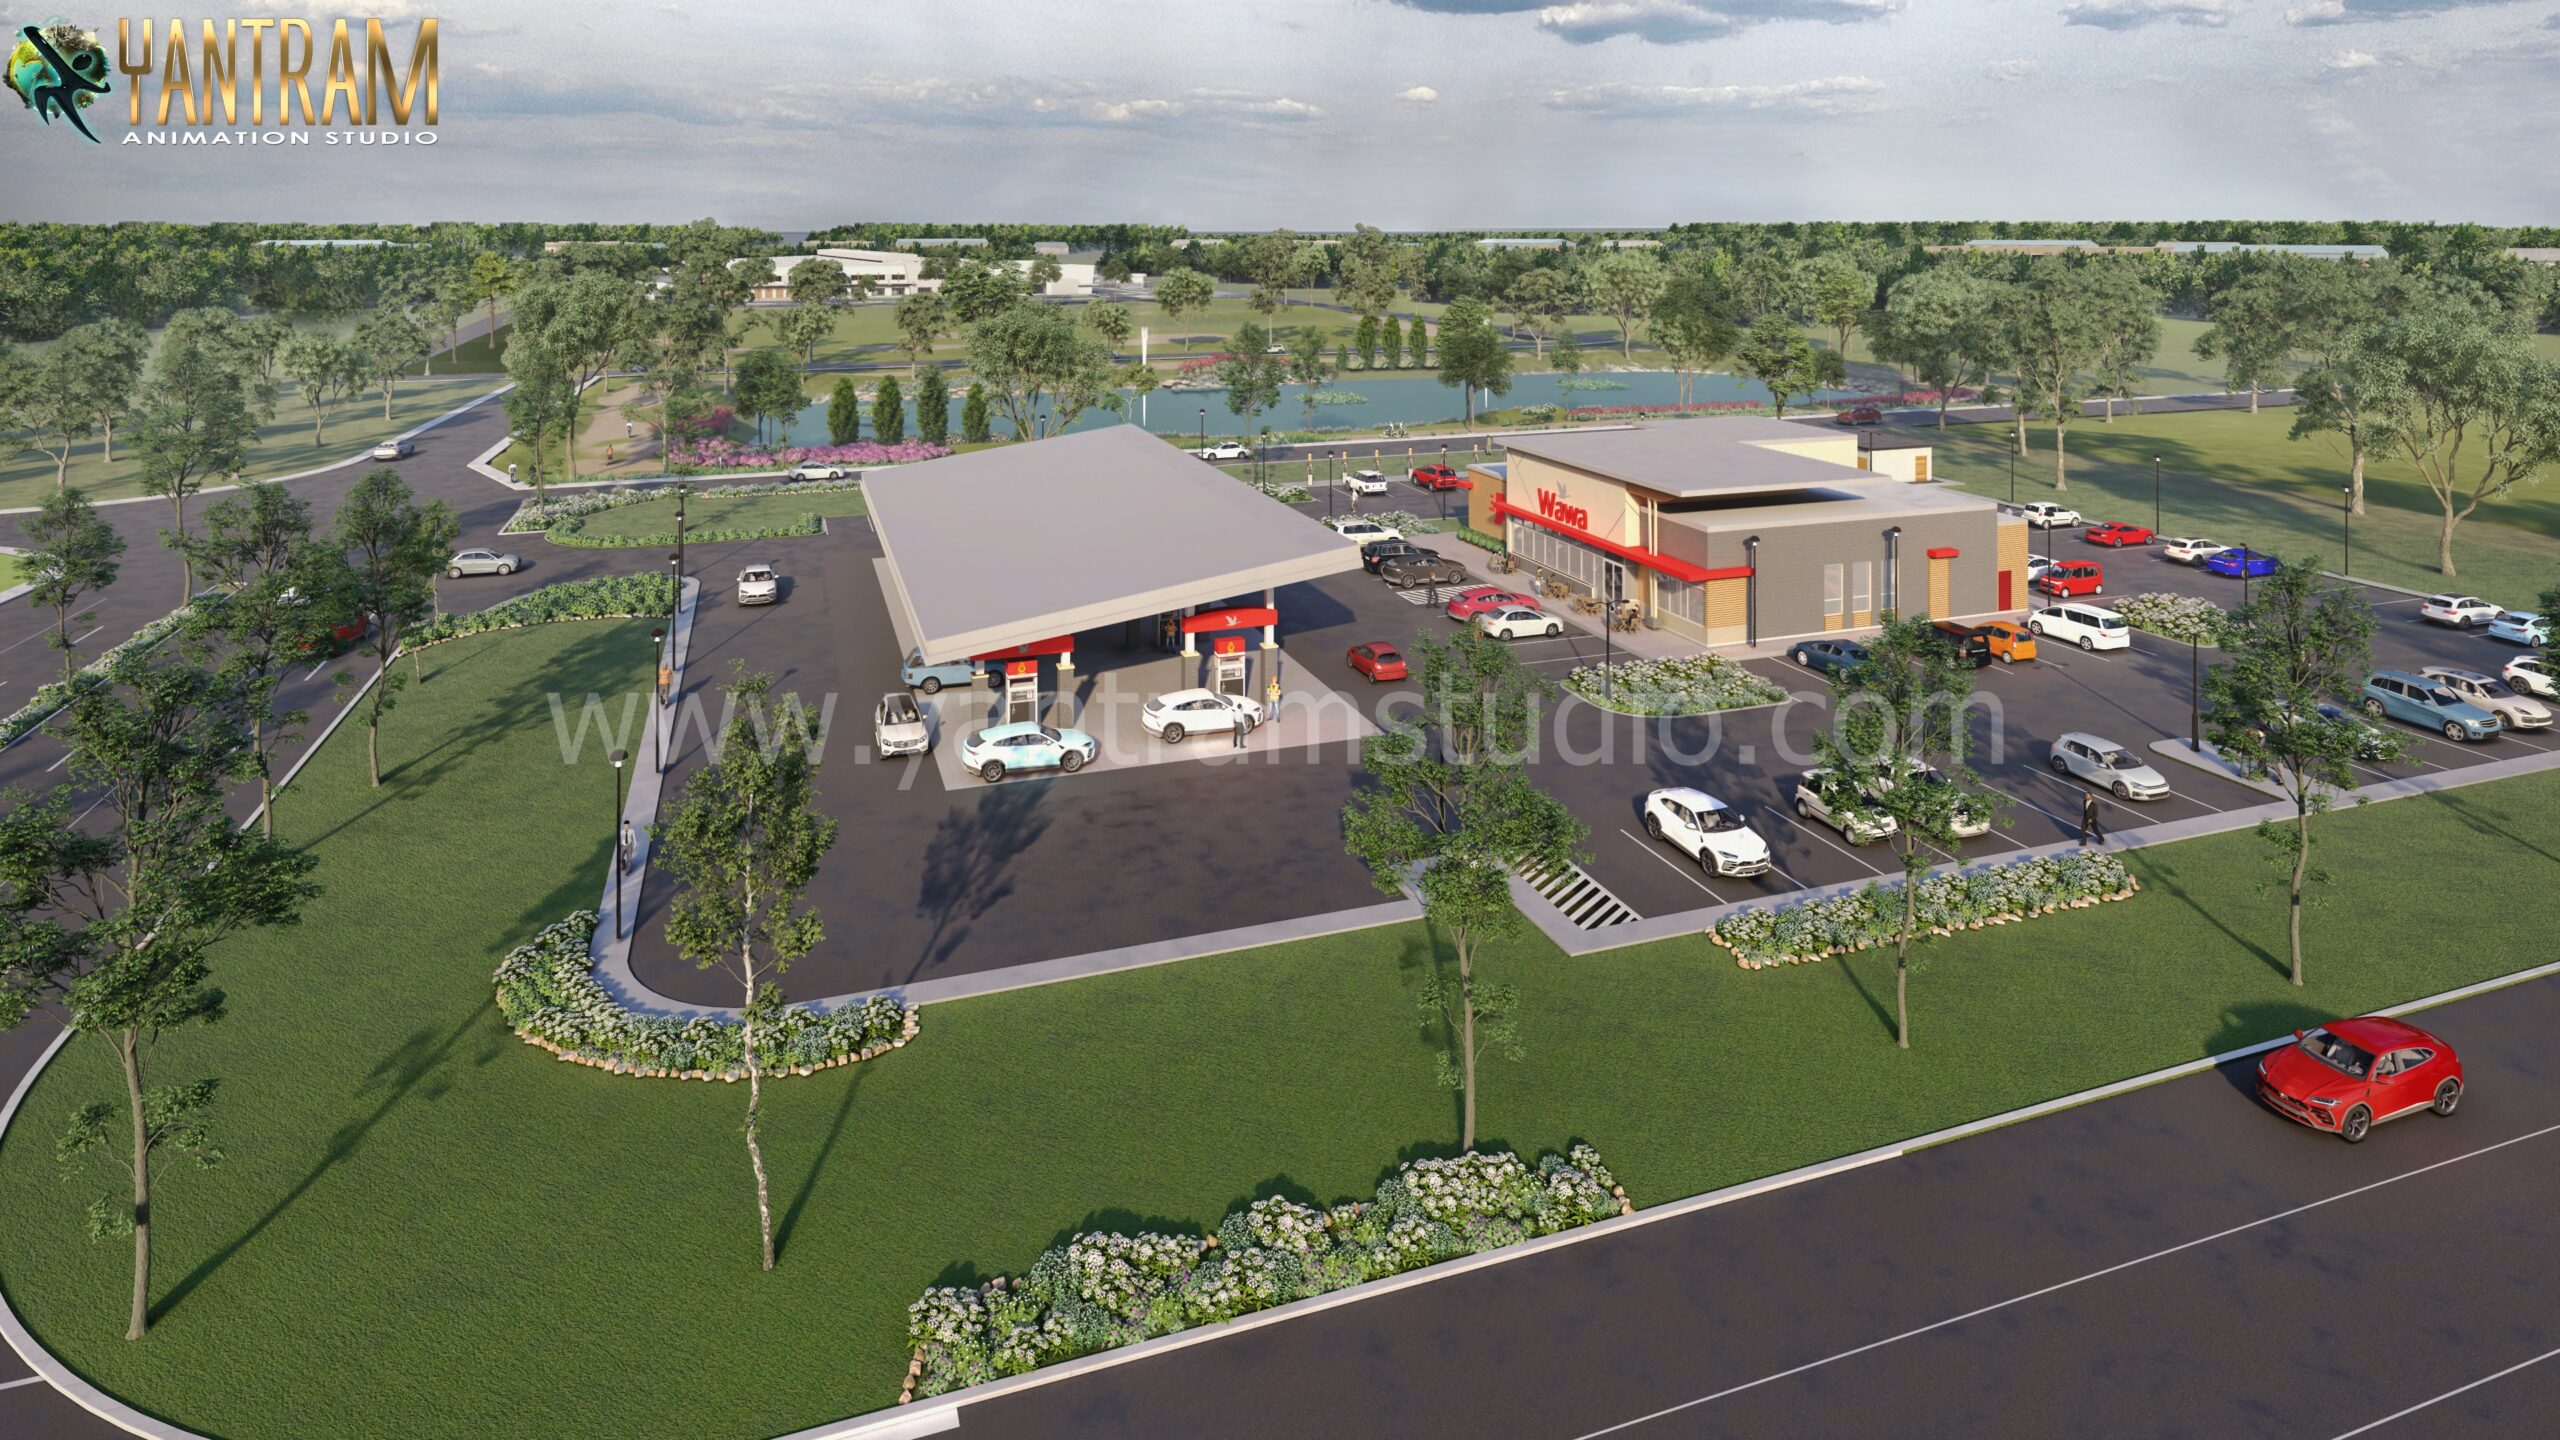 3D Exterior Rendering Services for an Innovative Gas-station in Orlando, Florida